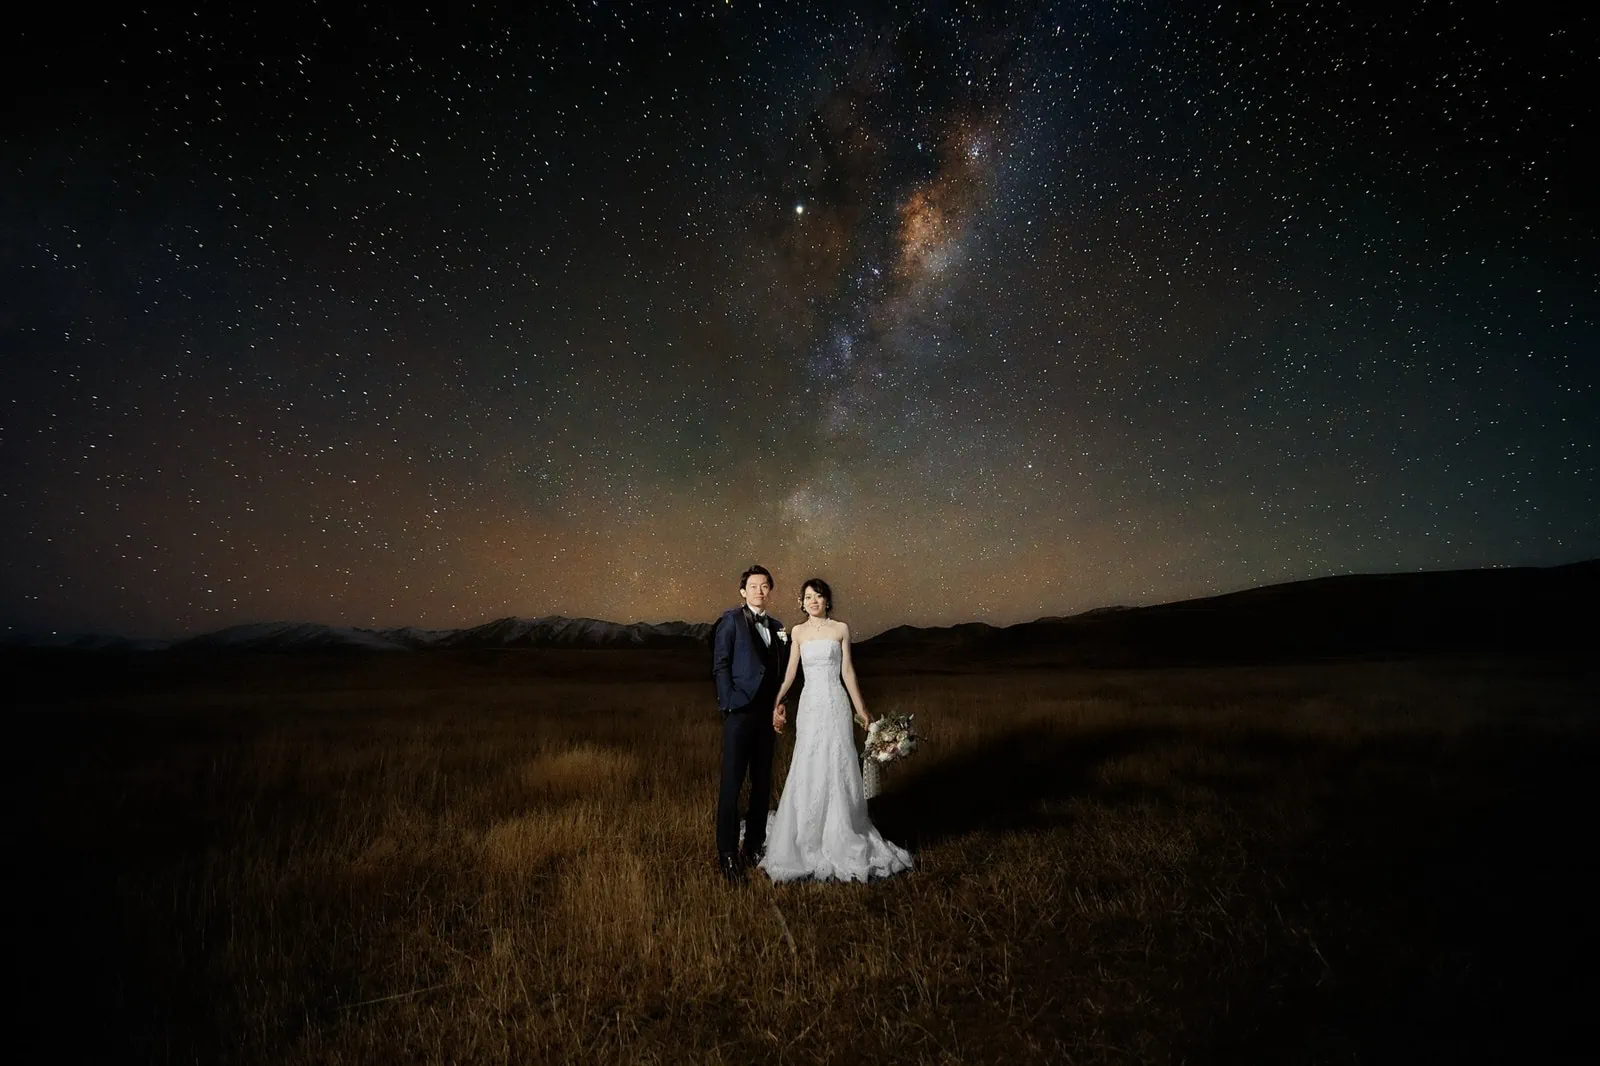 Queenstown New Zealand Elopement Wedding Photographer - A stunning bride and groom captured in a mesmerizing Starry Night Shoot.